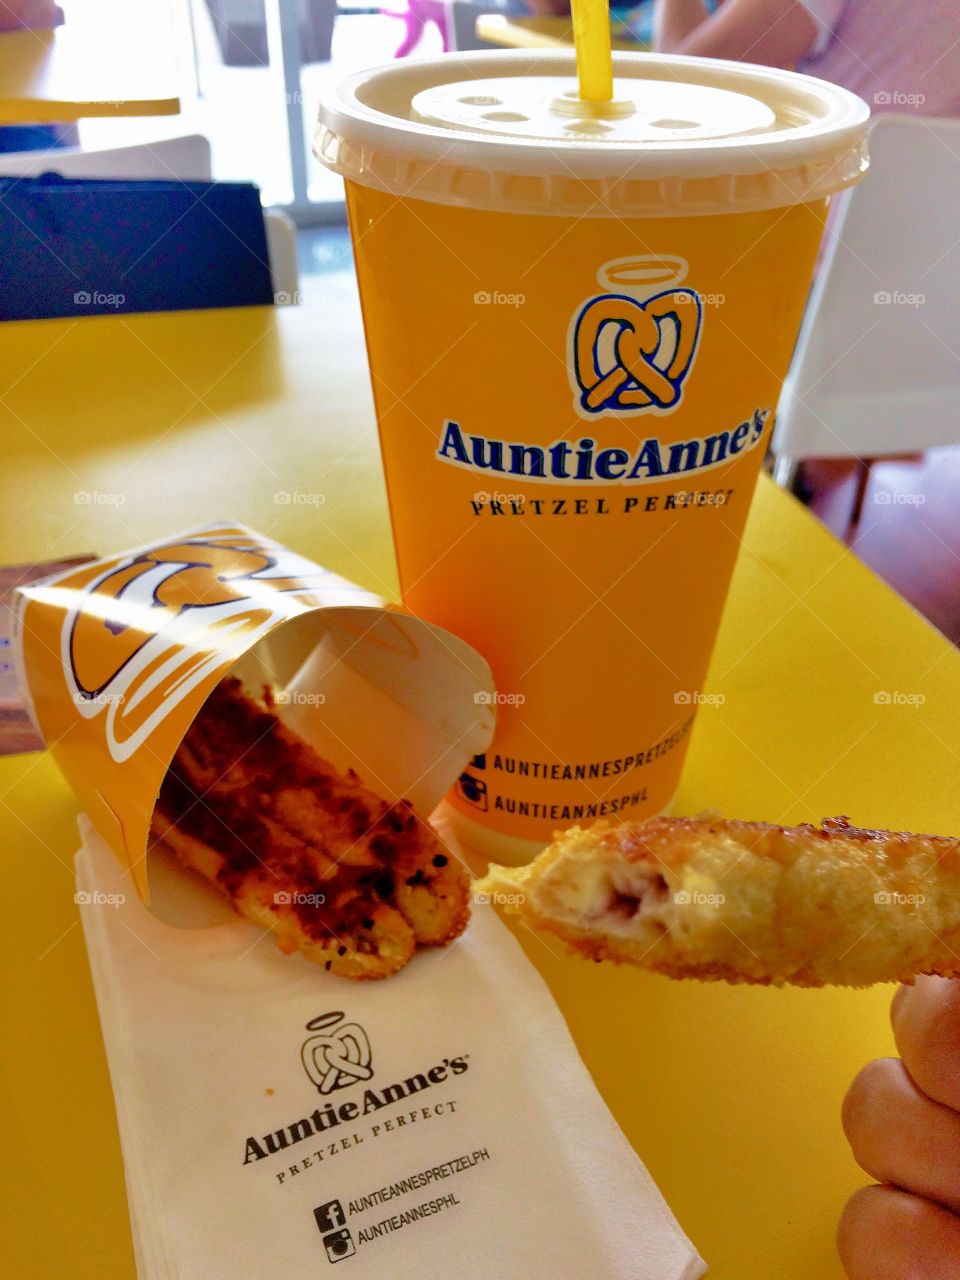 Can't get enough of Aunty Anne's blueberry cheese pretzels